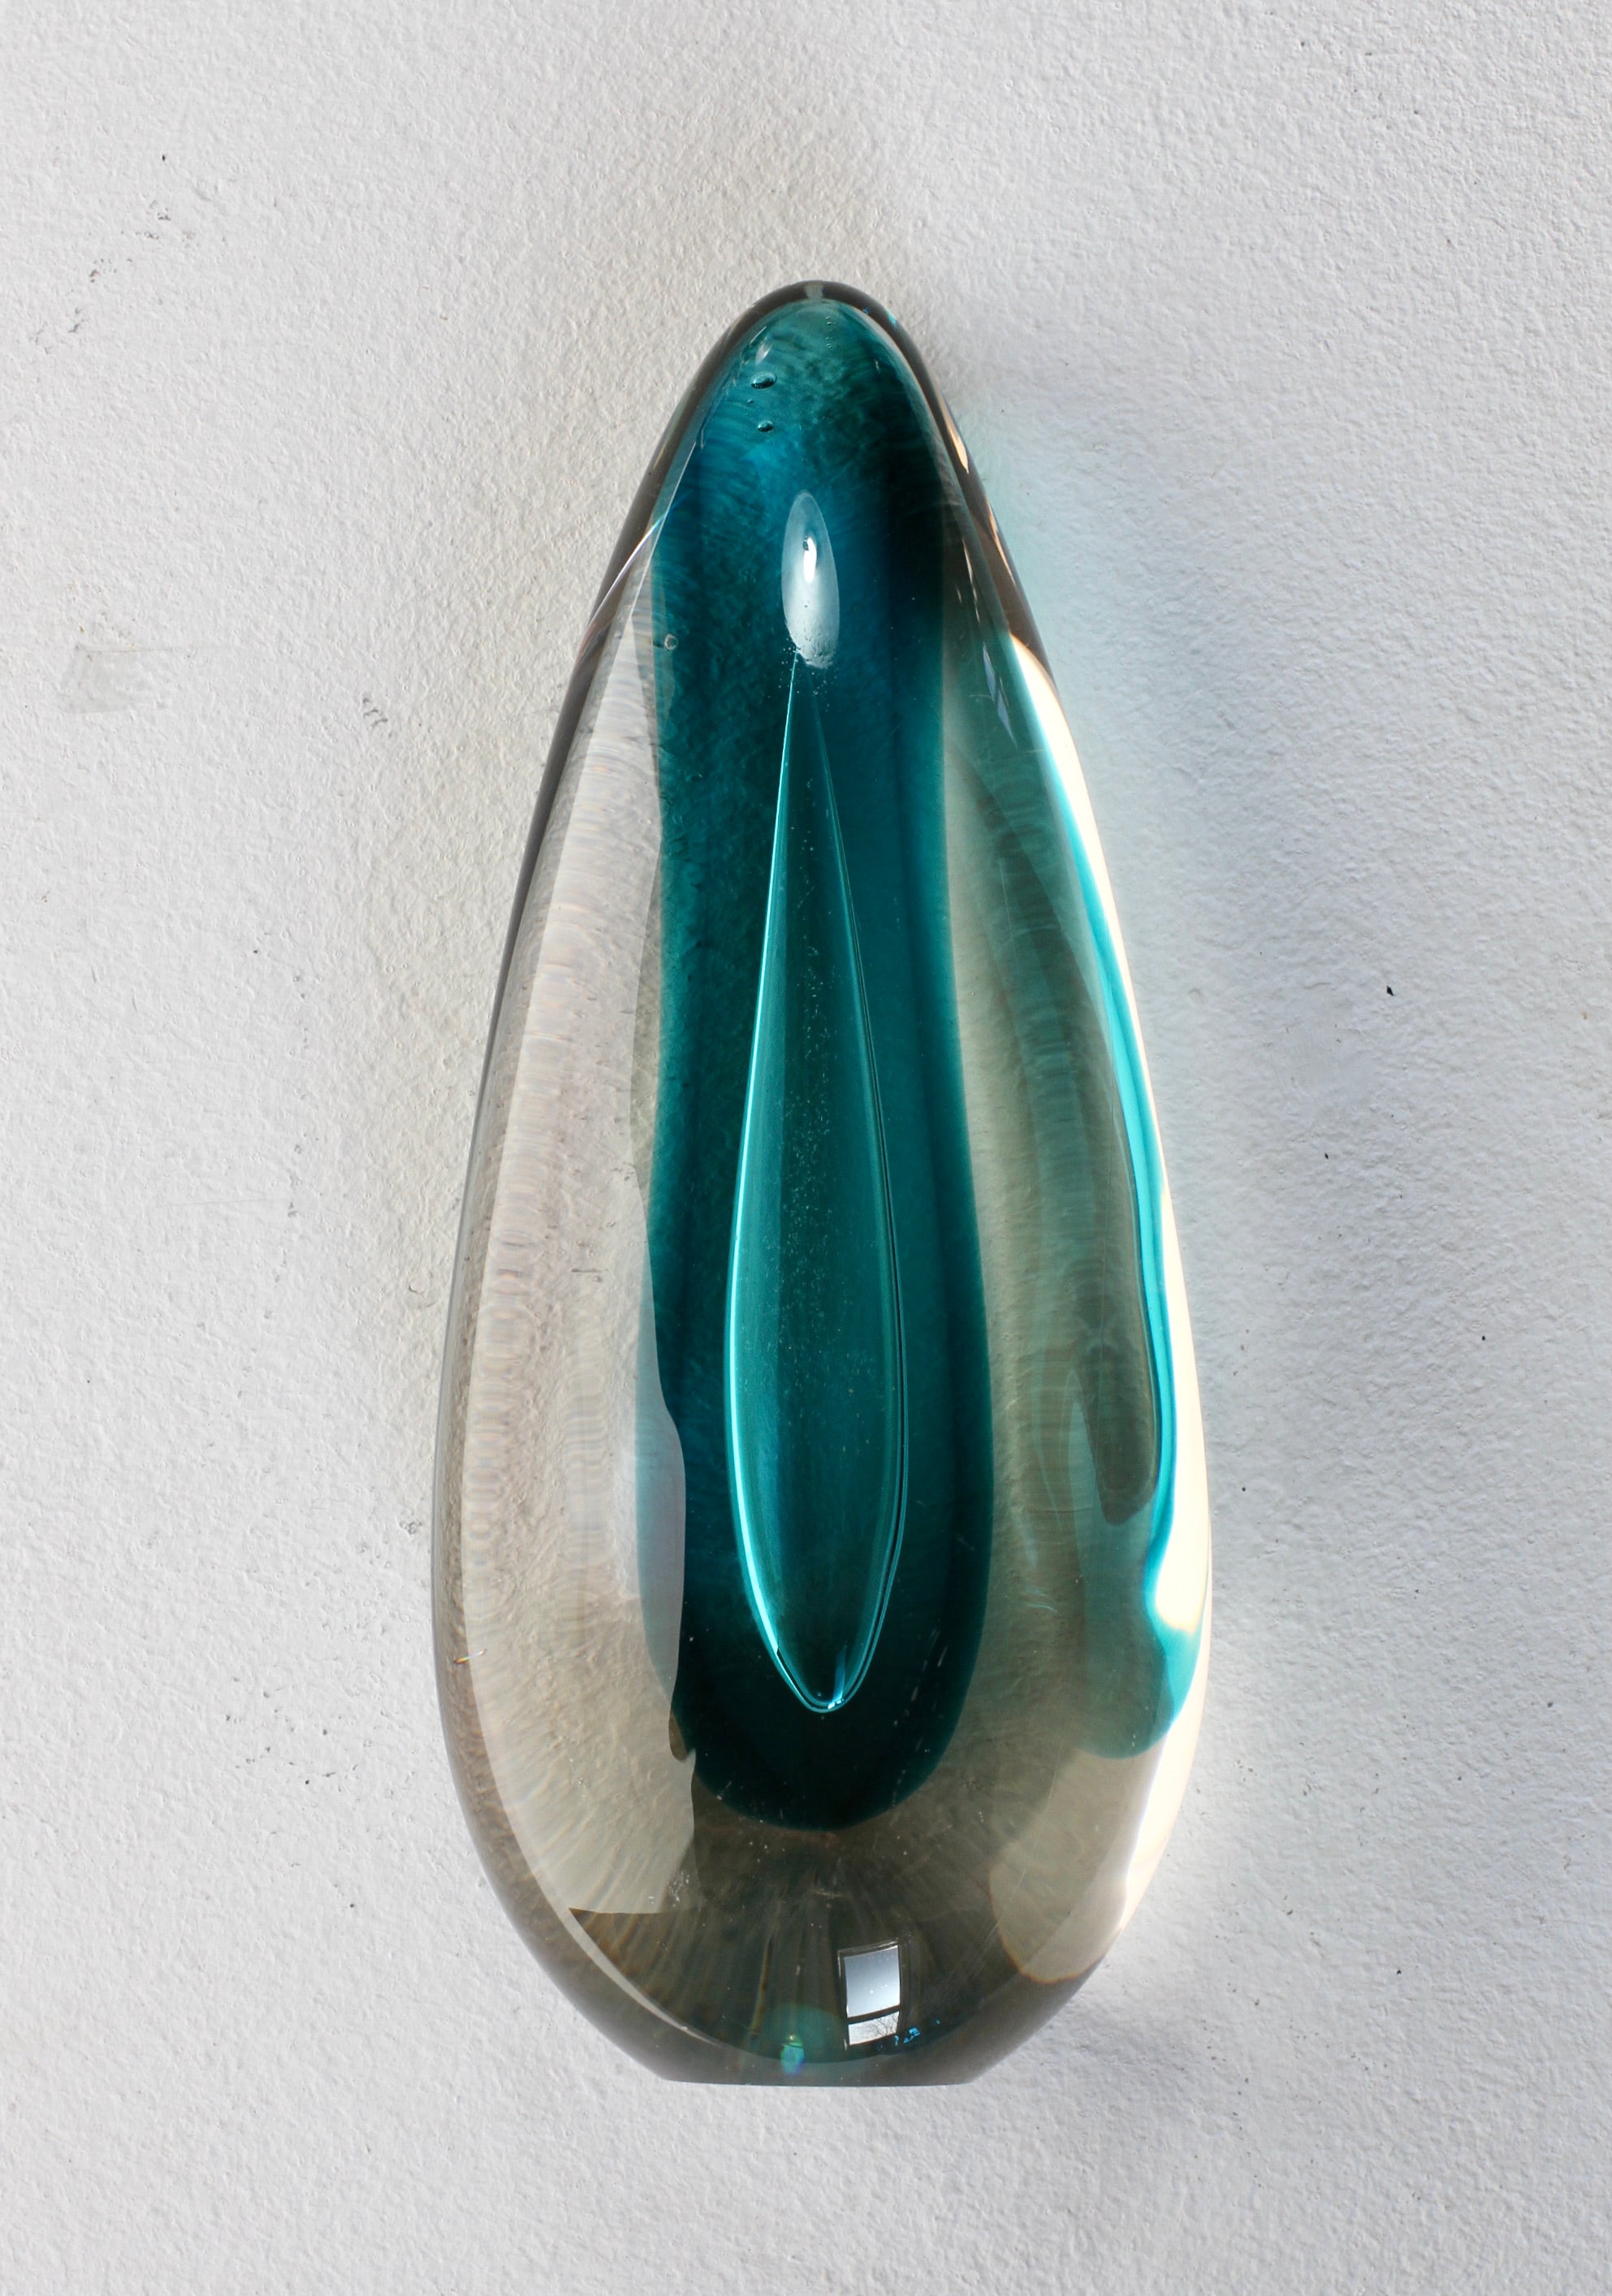 Rare, Mid-Century Modern vintage water drop shaped paperweight with singular trapped air bubble inclusion within the green/blue/turquoise clear (slightly tinted) glass. Very unusual shape and design.

Dimensions: 
20.3cm tall by 8.7cm wide by 6cm